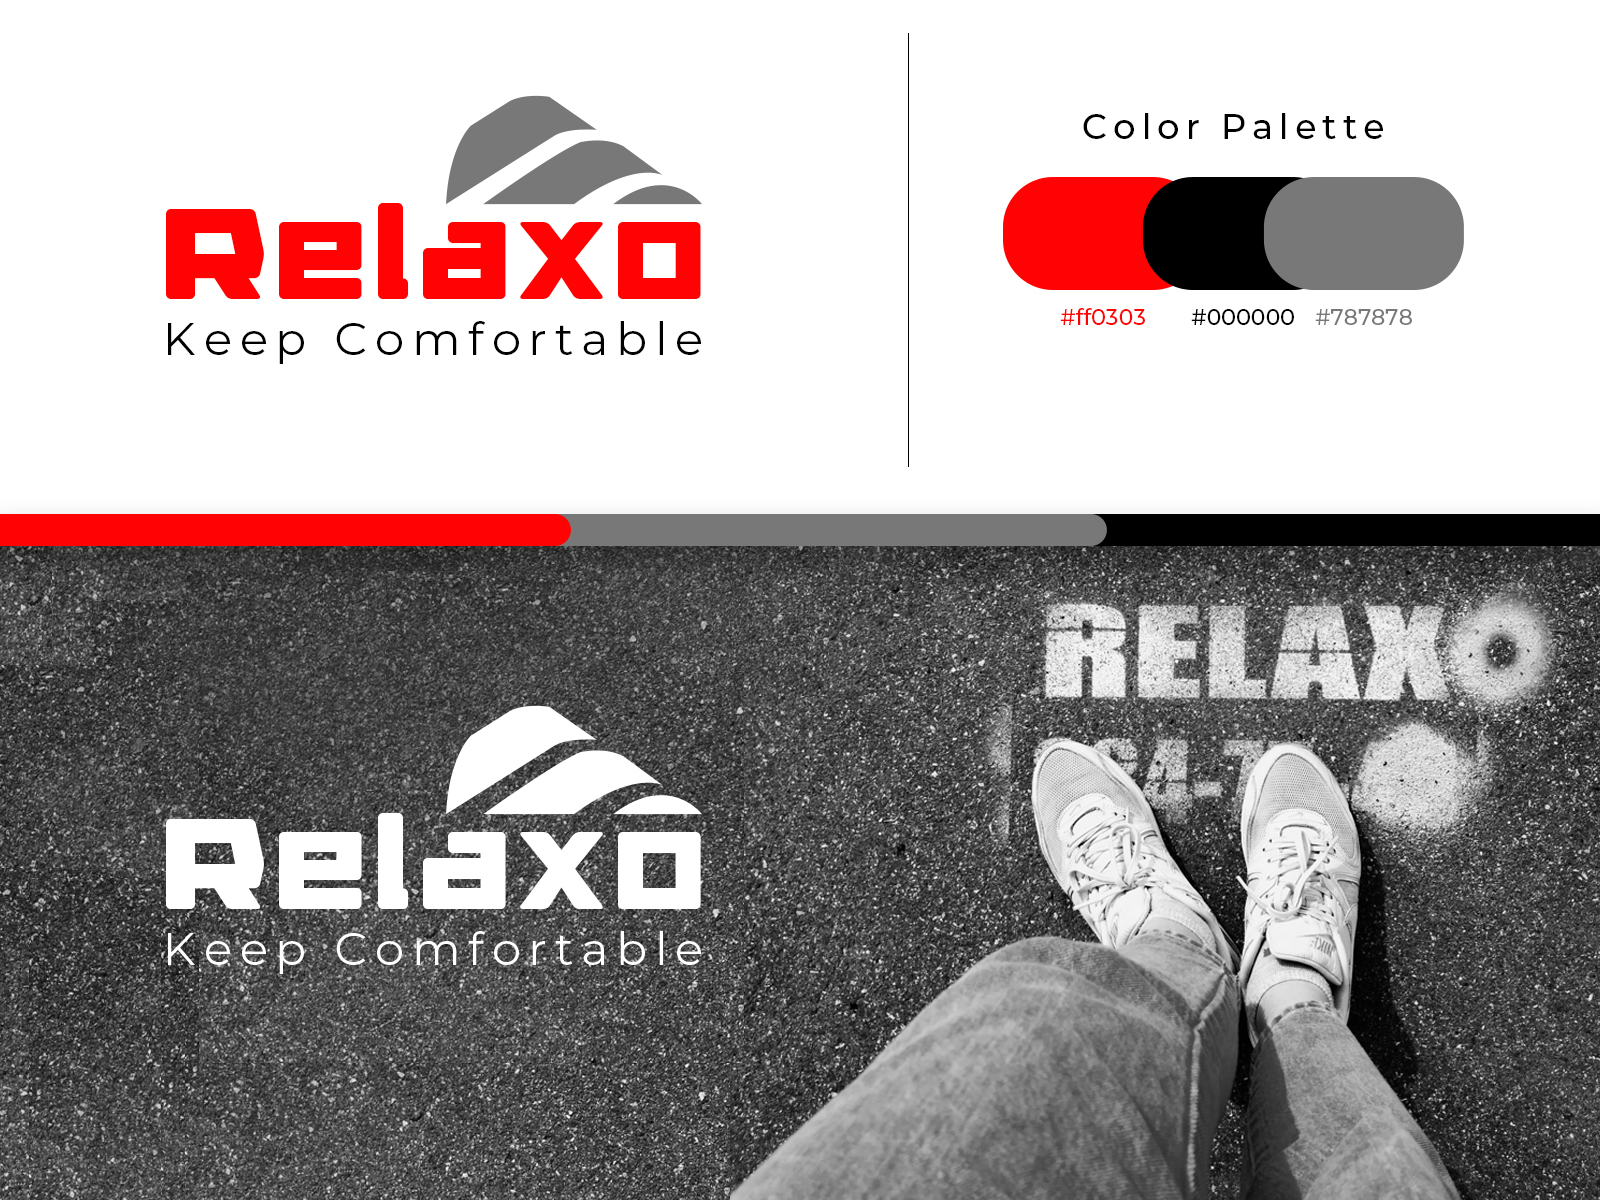 Relaxo Footwear – Dial Amritsar – Local Shops, Hotels, Restaurant,  Shopping, Business, Industry